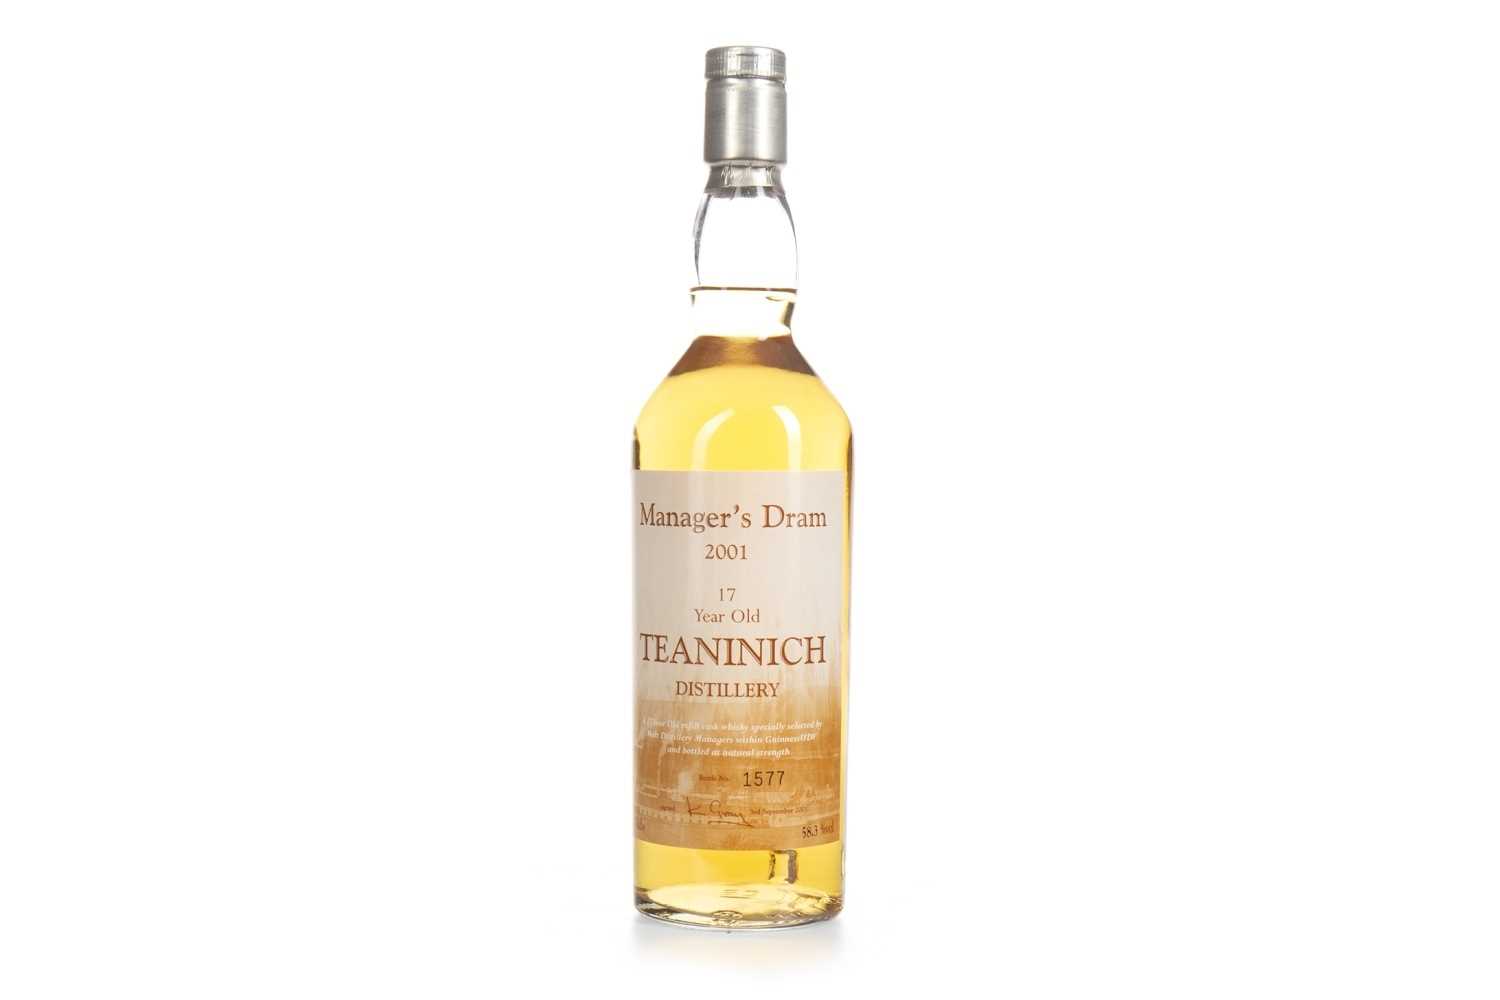 Lot 79 - TEANINICH THE MANAGERS DRAM AGED 17 YEARS